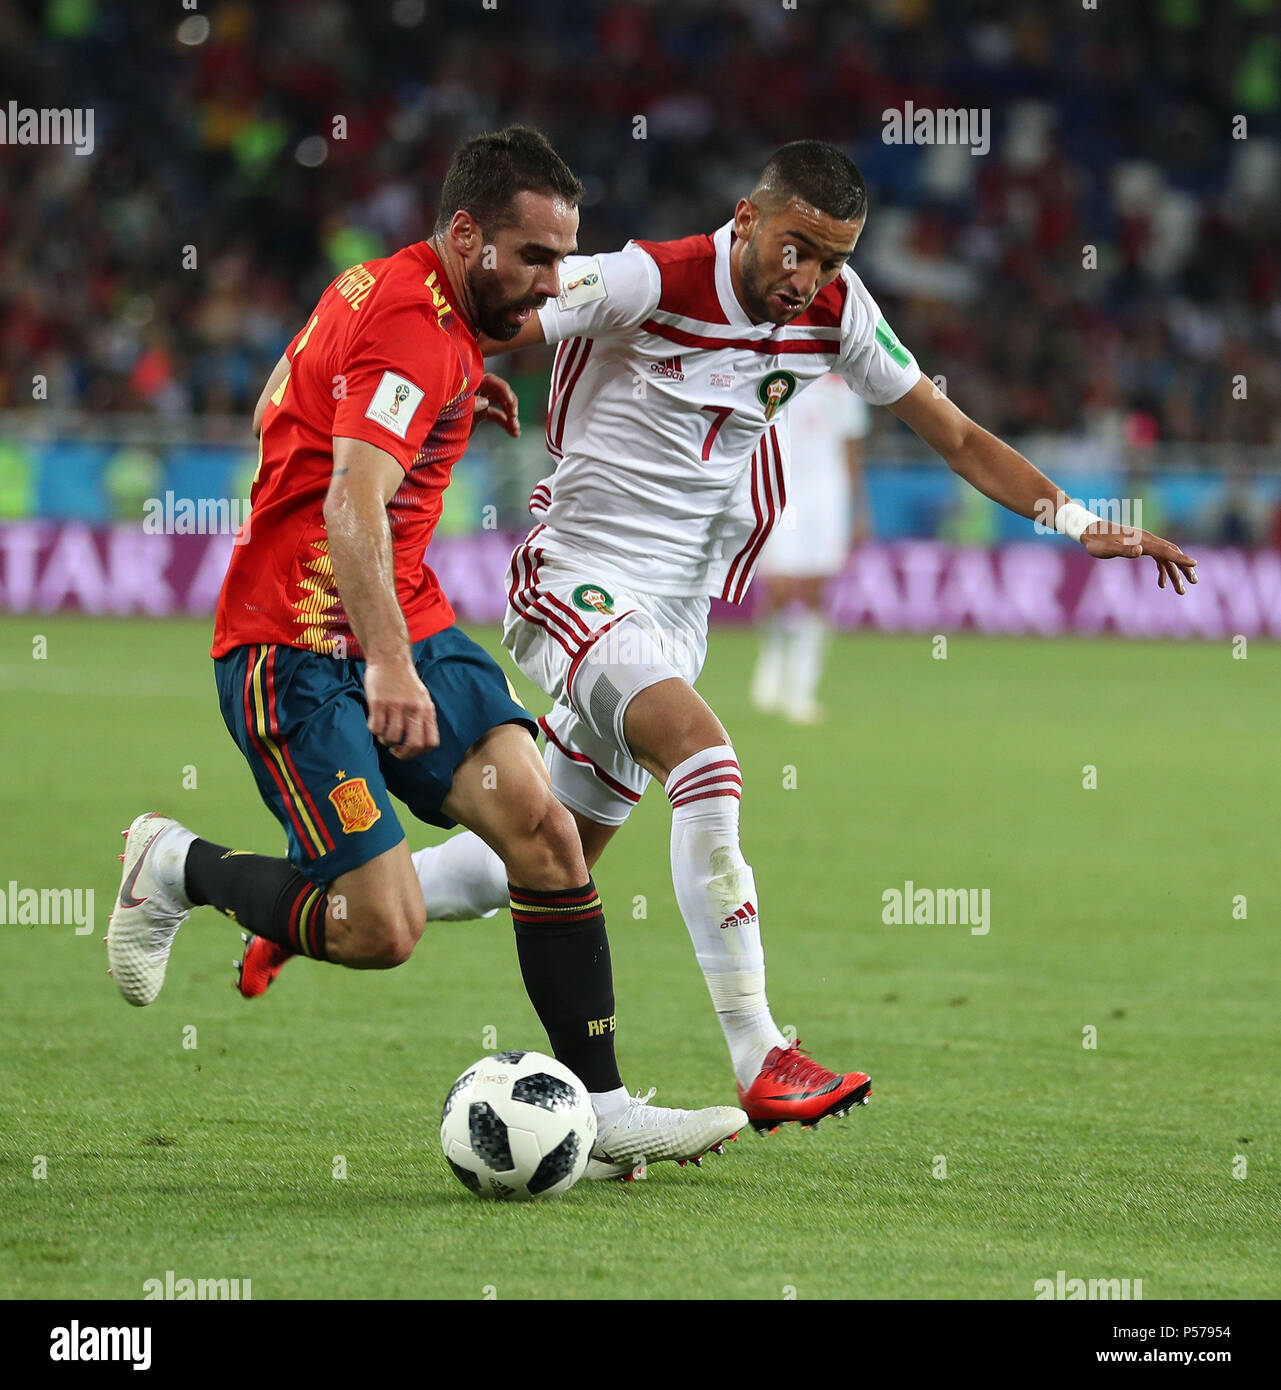 Kaliningrad, Russia. 25th June, 2018. Dani Carvajal (L) of Spain vies with Hakim Ziyach of Morocco during the 2018 FIFA World Cup Group B match between Spain and Morocco in Kaliningrad, Russia, June 25, 2018. Credit: Lu Jinbo/Xinhua/Alamy Live News Stock Photo